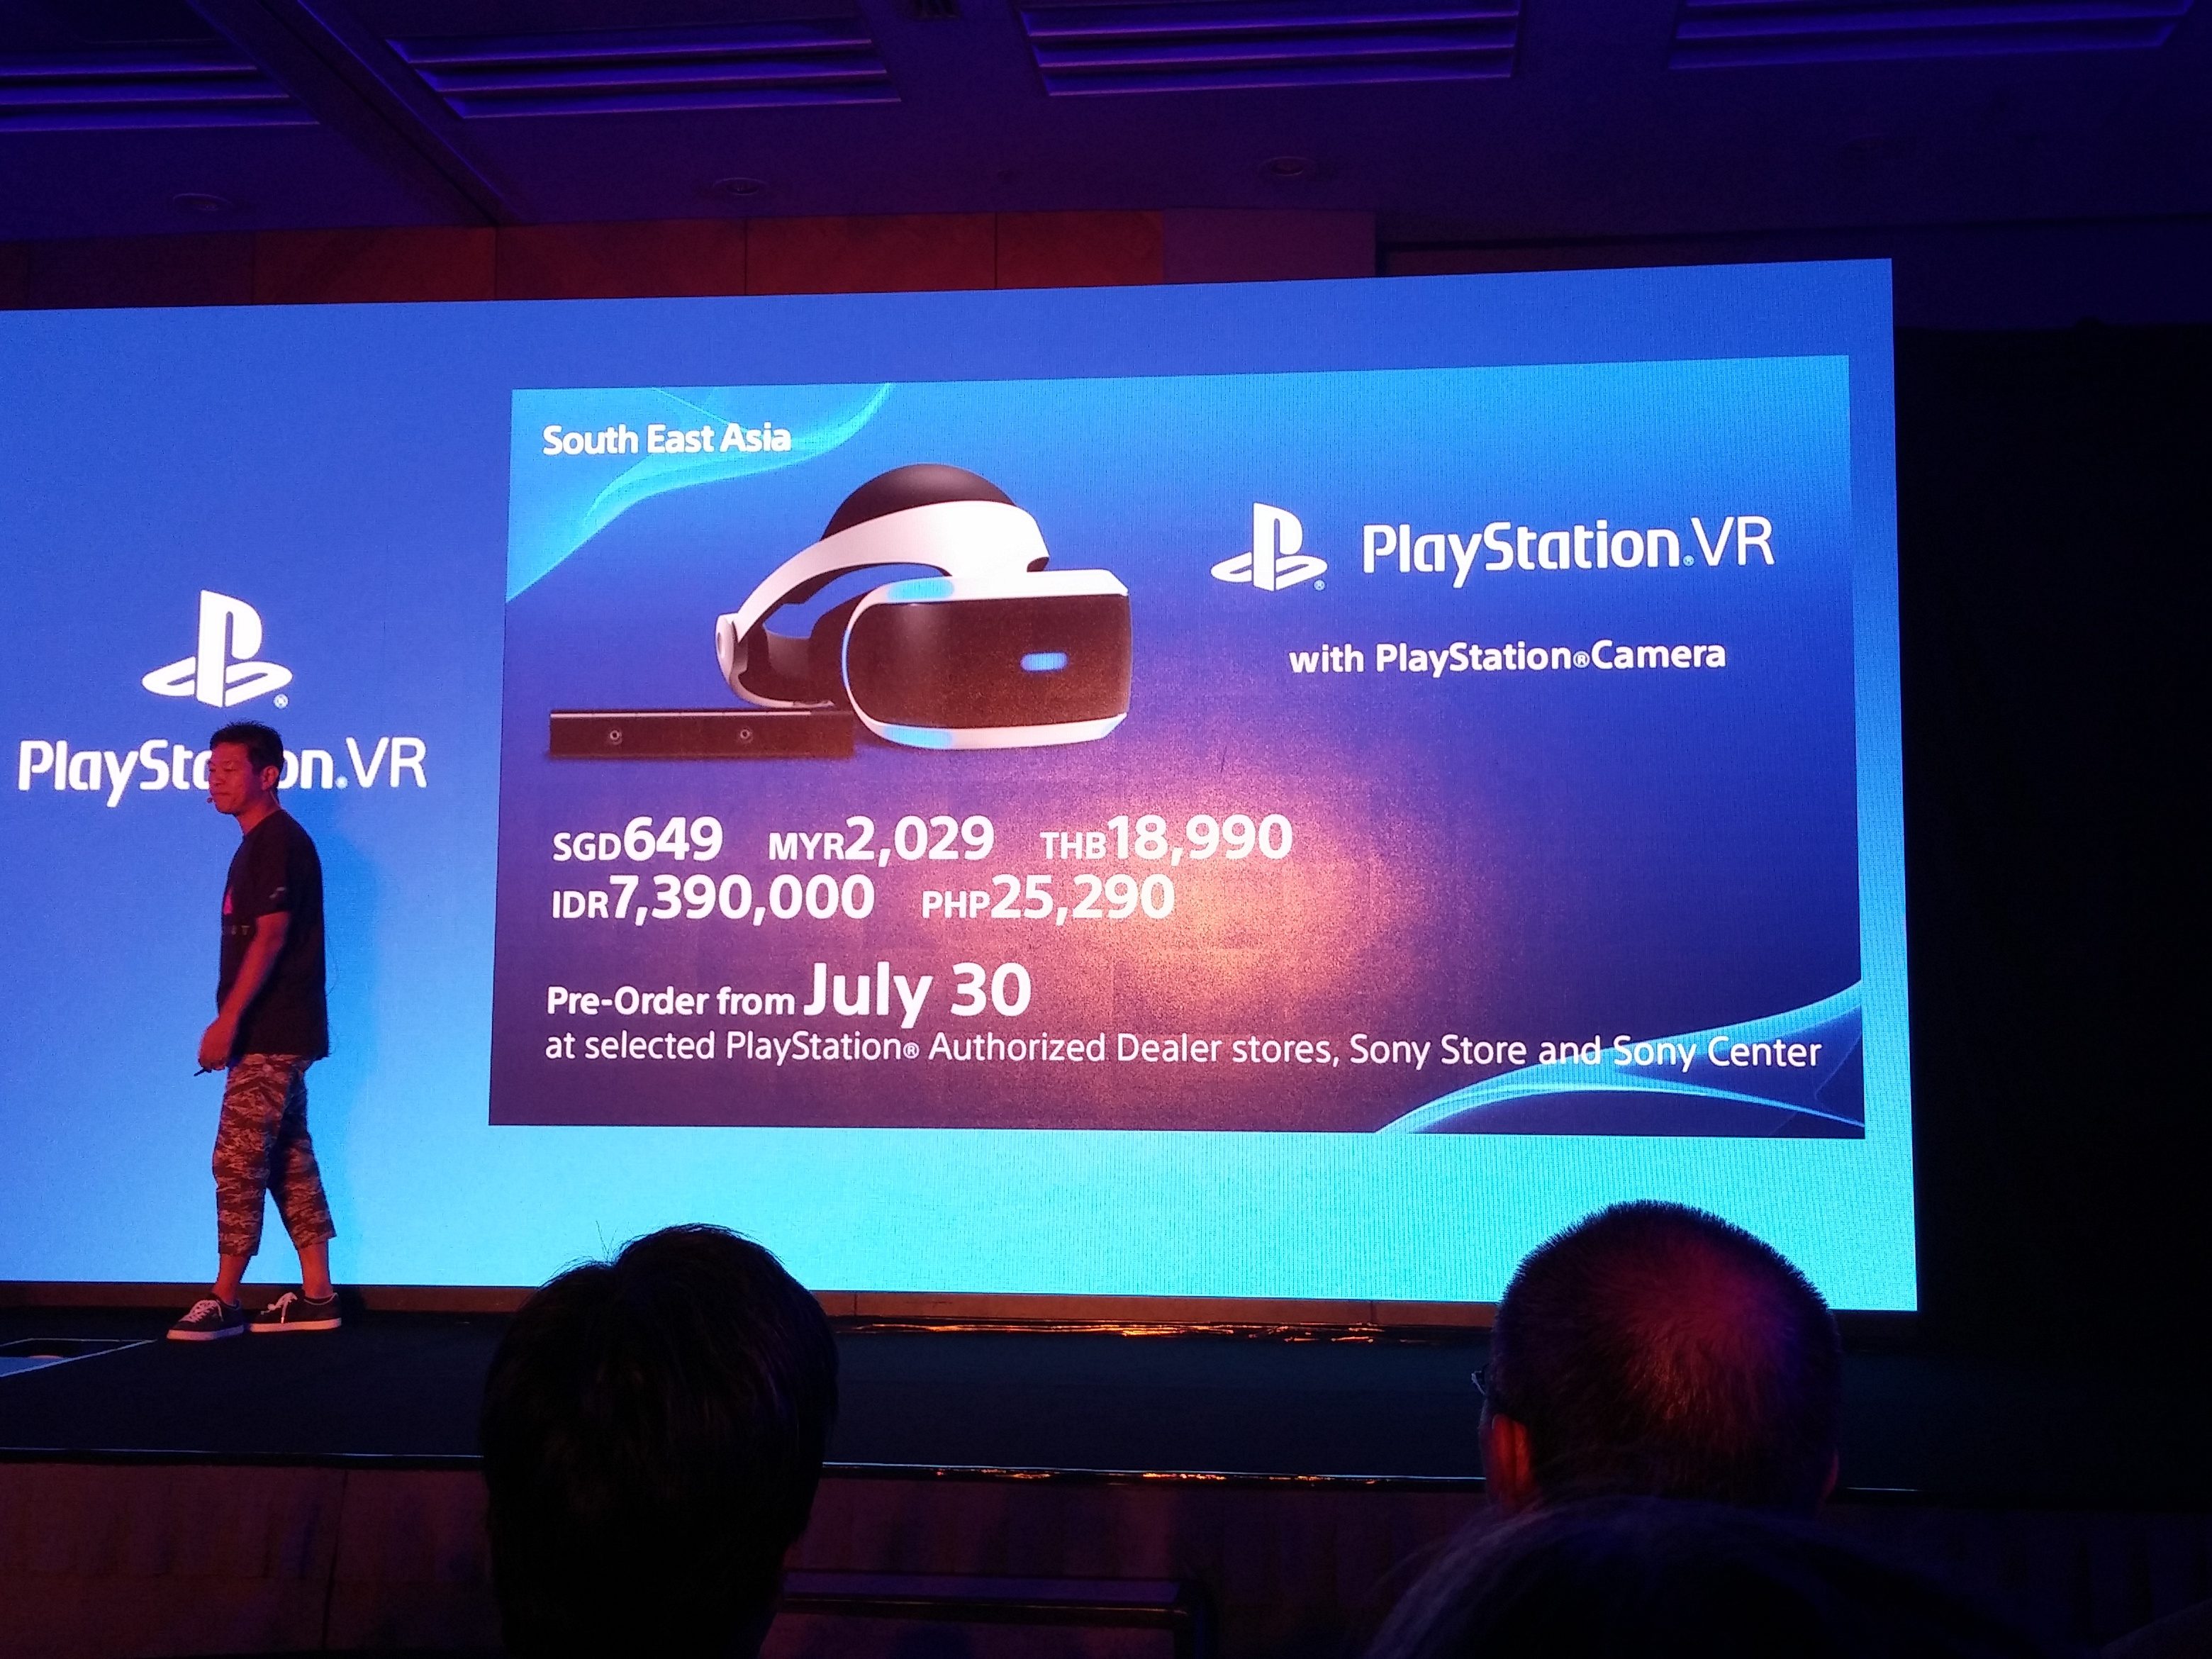 Pricing for the PlayStation VR with PlayStation Camera 